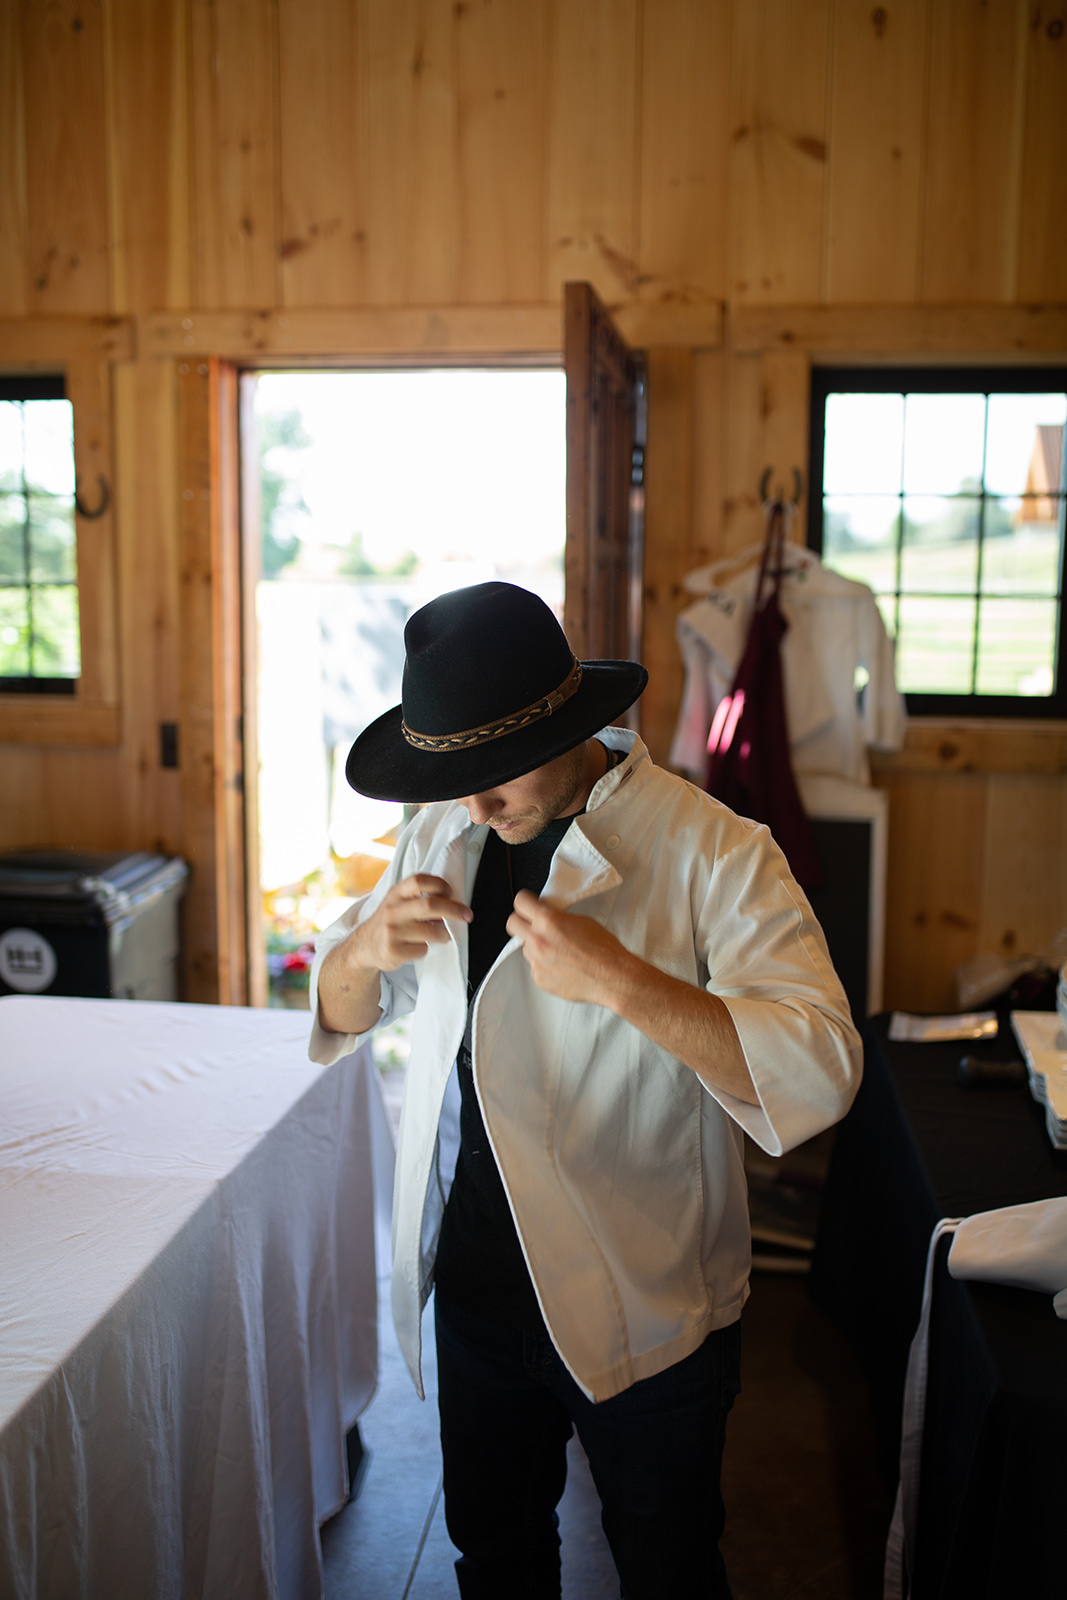 Chef with wide brimmed hat putting on his whites prior to service - John Robson Photography